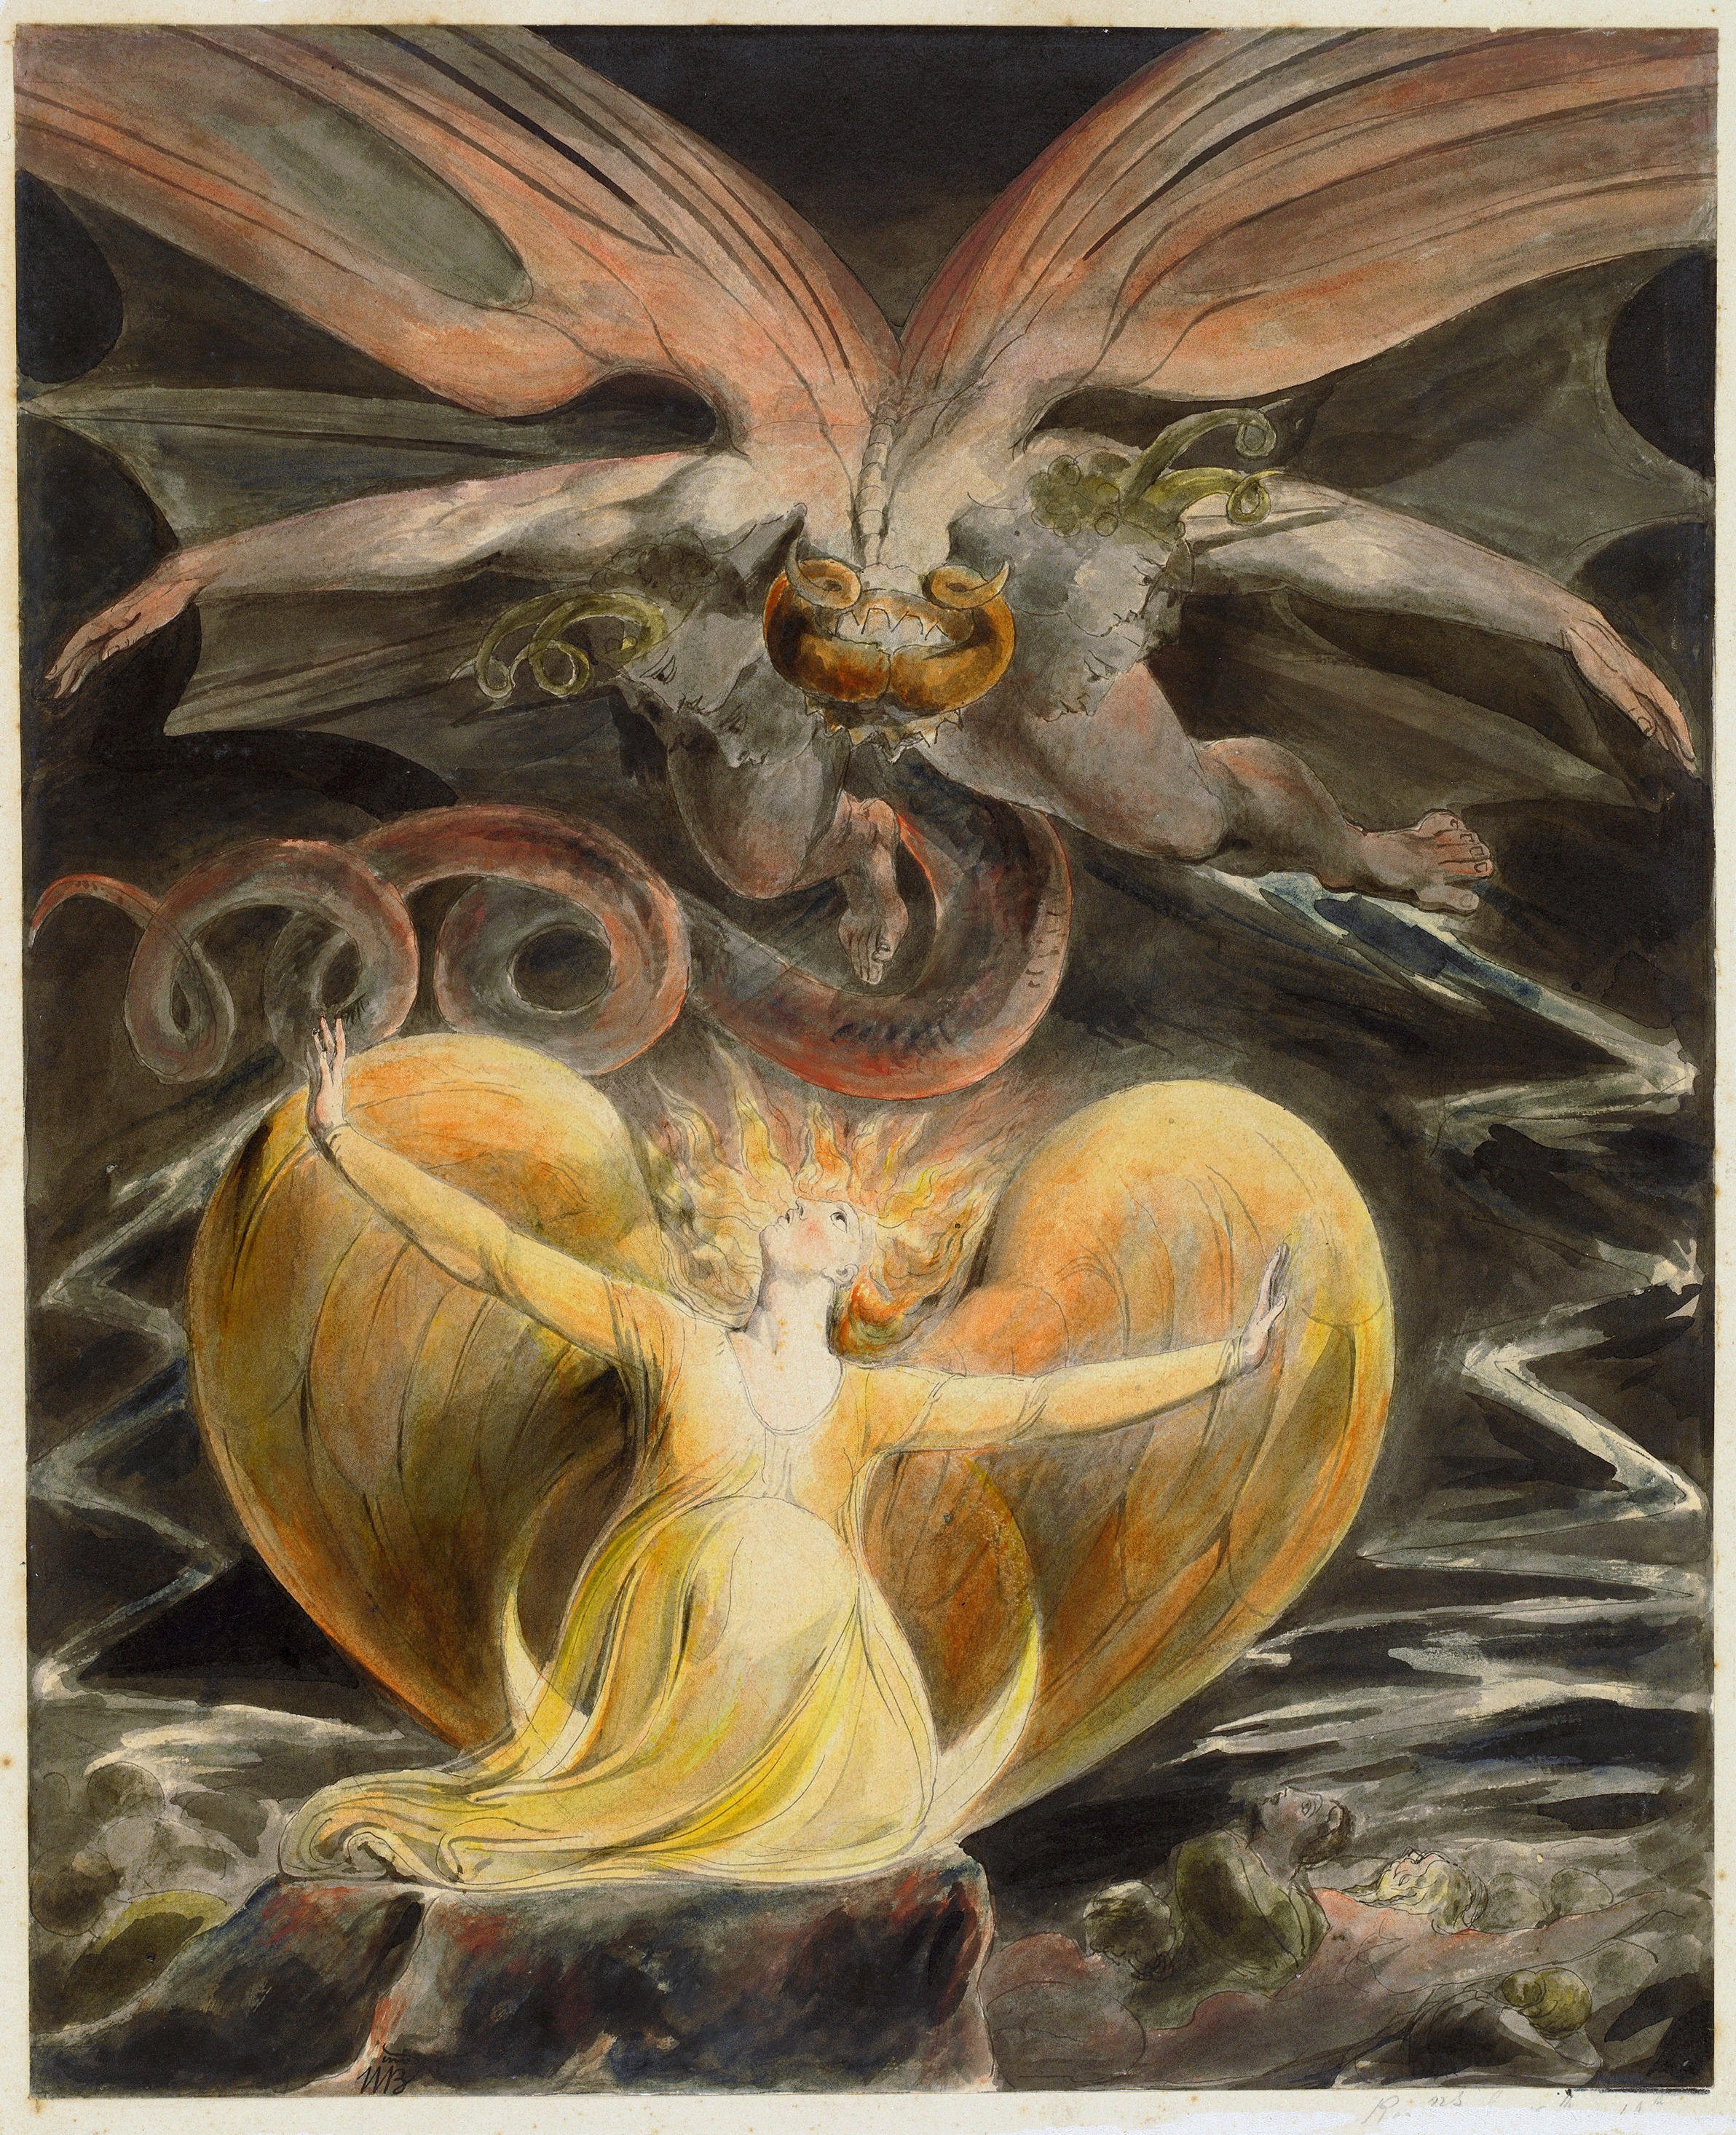 The Great Red Dragon and the Woman Clothed with the Sun by William Blake - c. 1805 - 43.7 x 34.8 cm National Gallery of Art